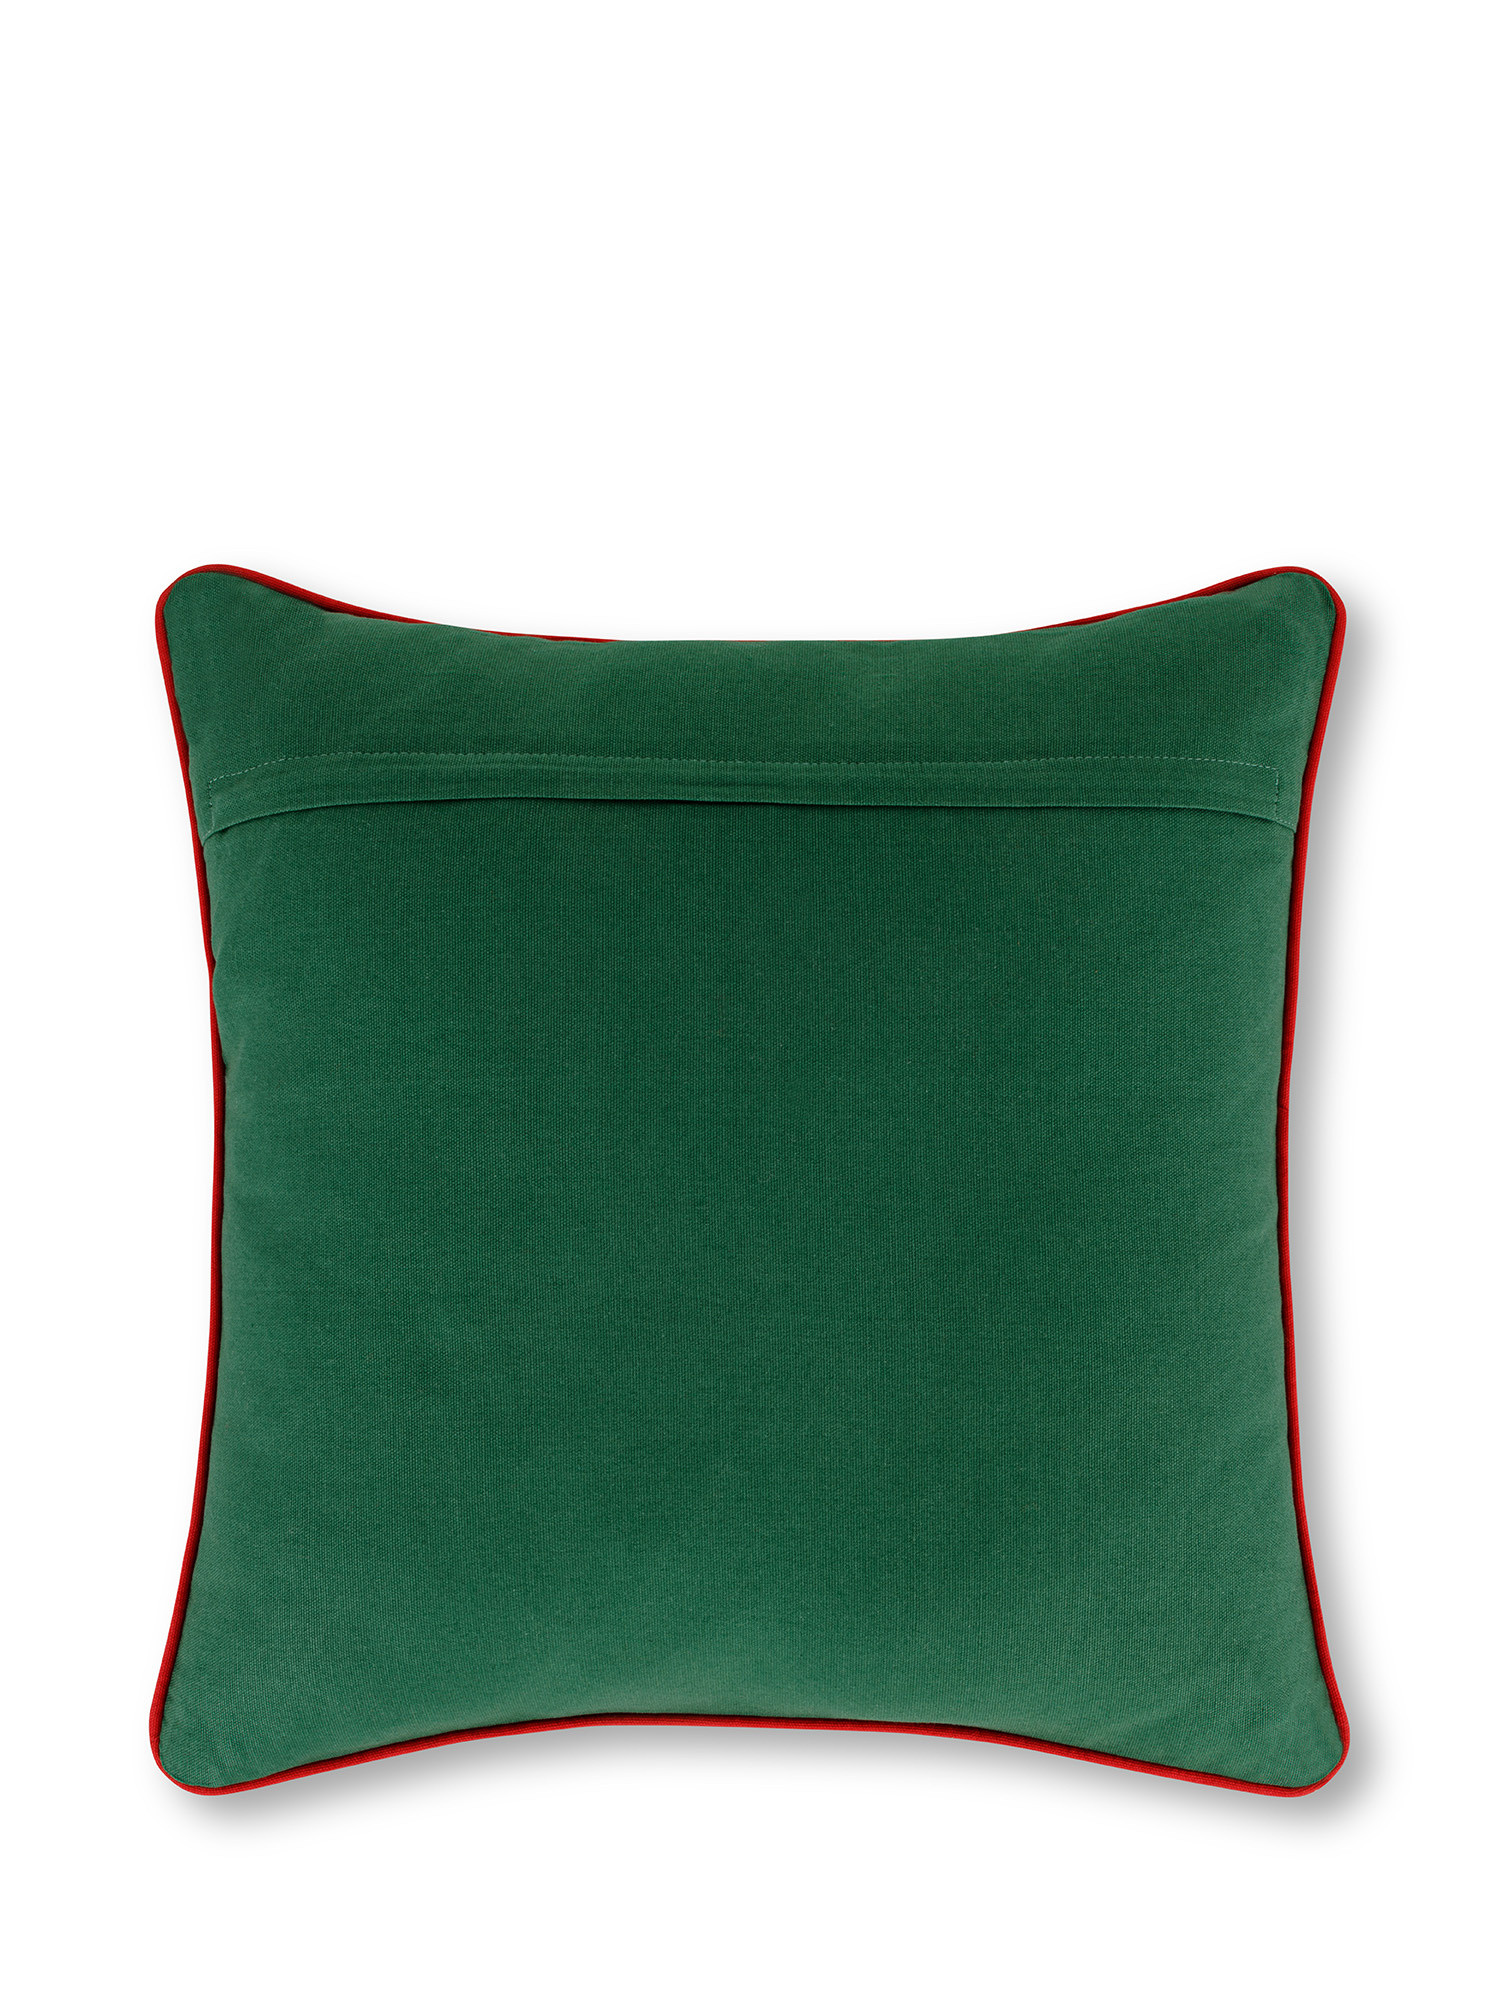 Christmas wreath embroidered cushion 45x45 cm, Green, large image number 1